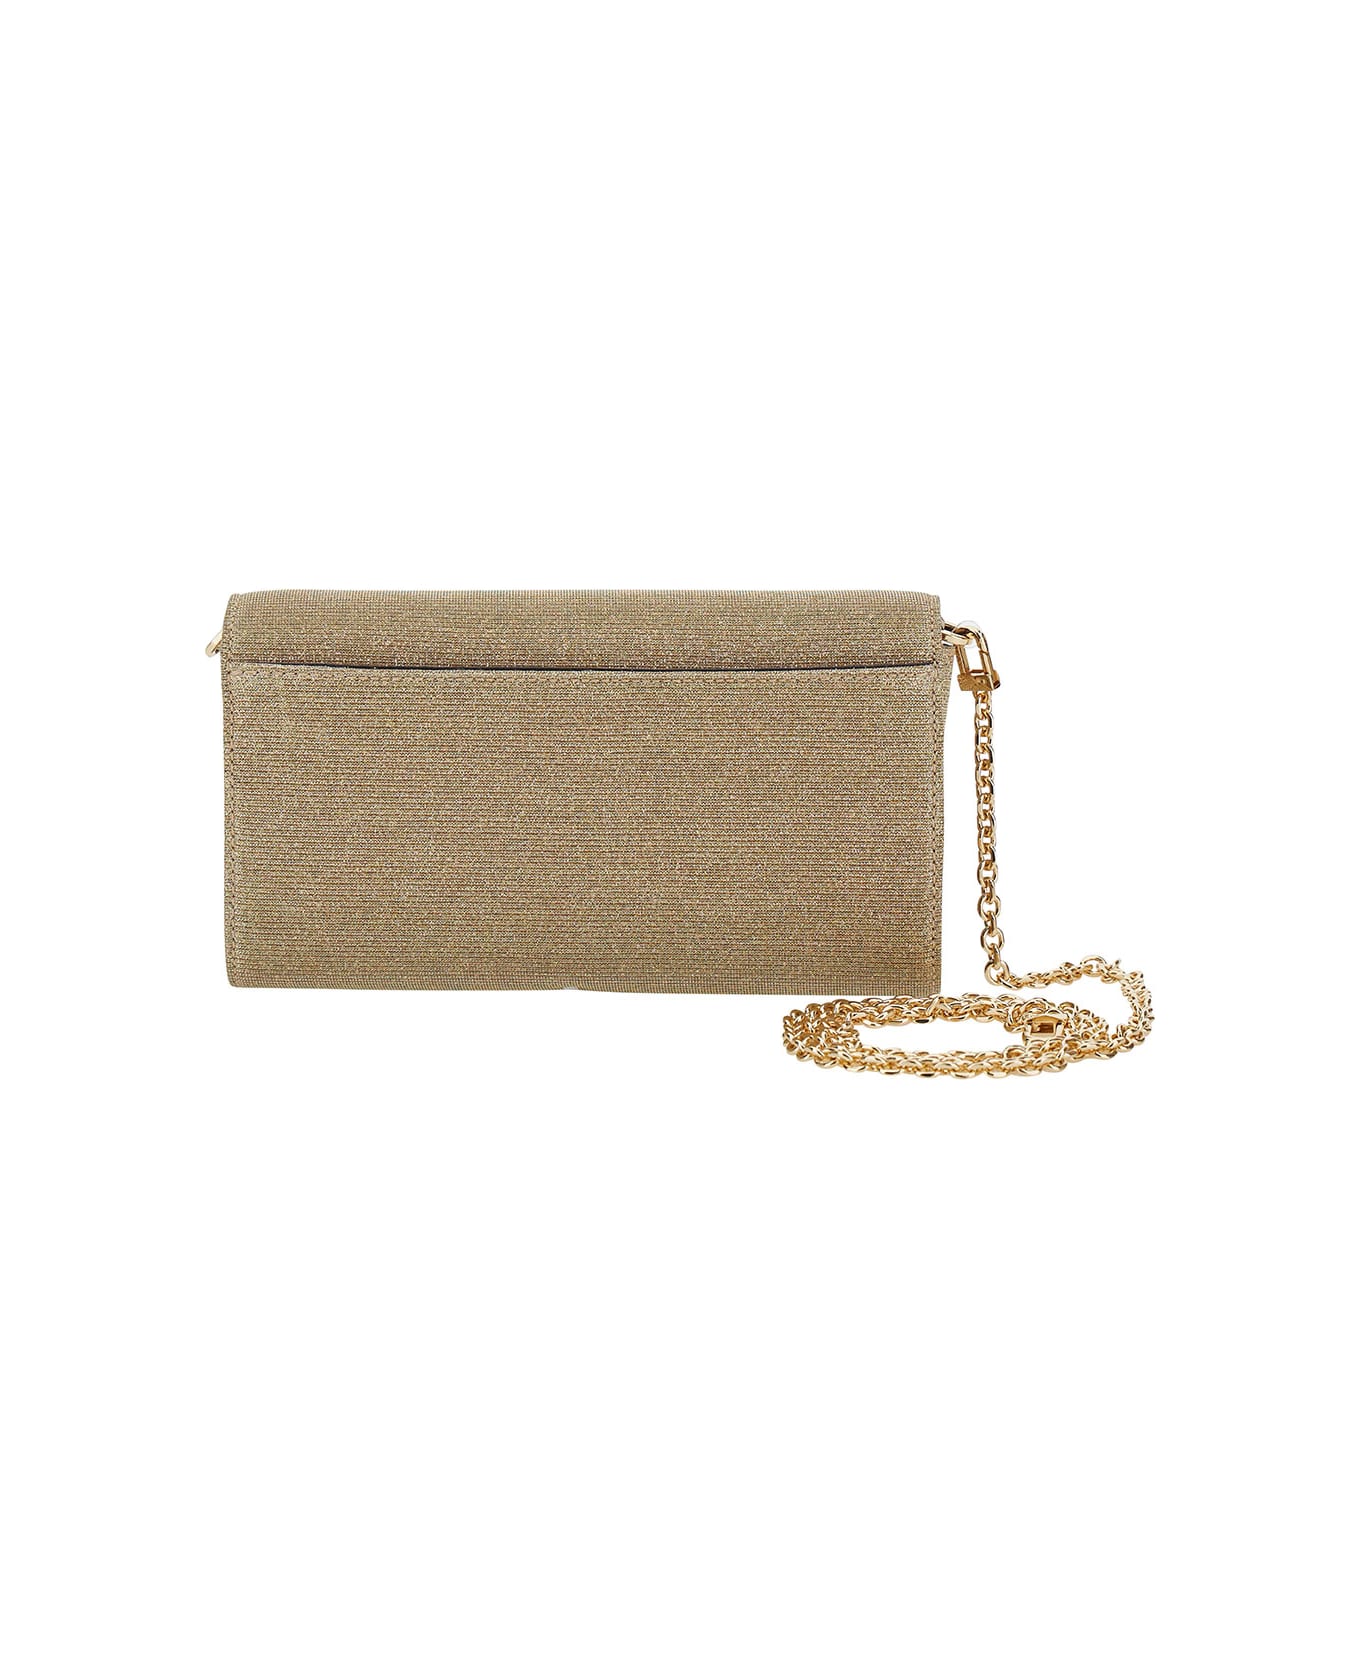 Michael Kors Collection Lg Ew Clutch - Pale Gold